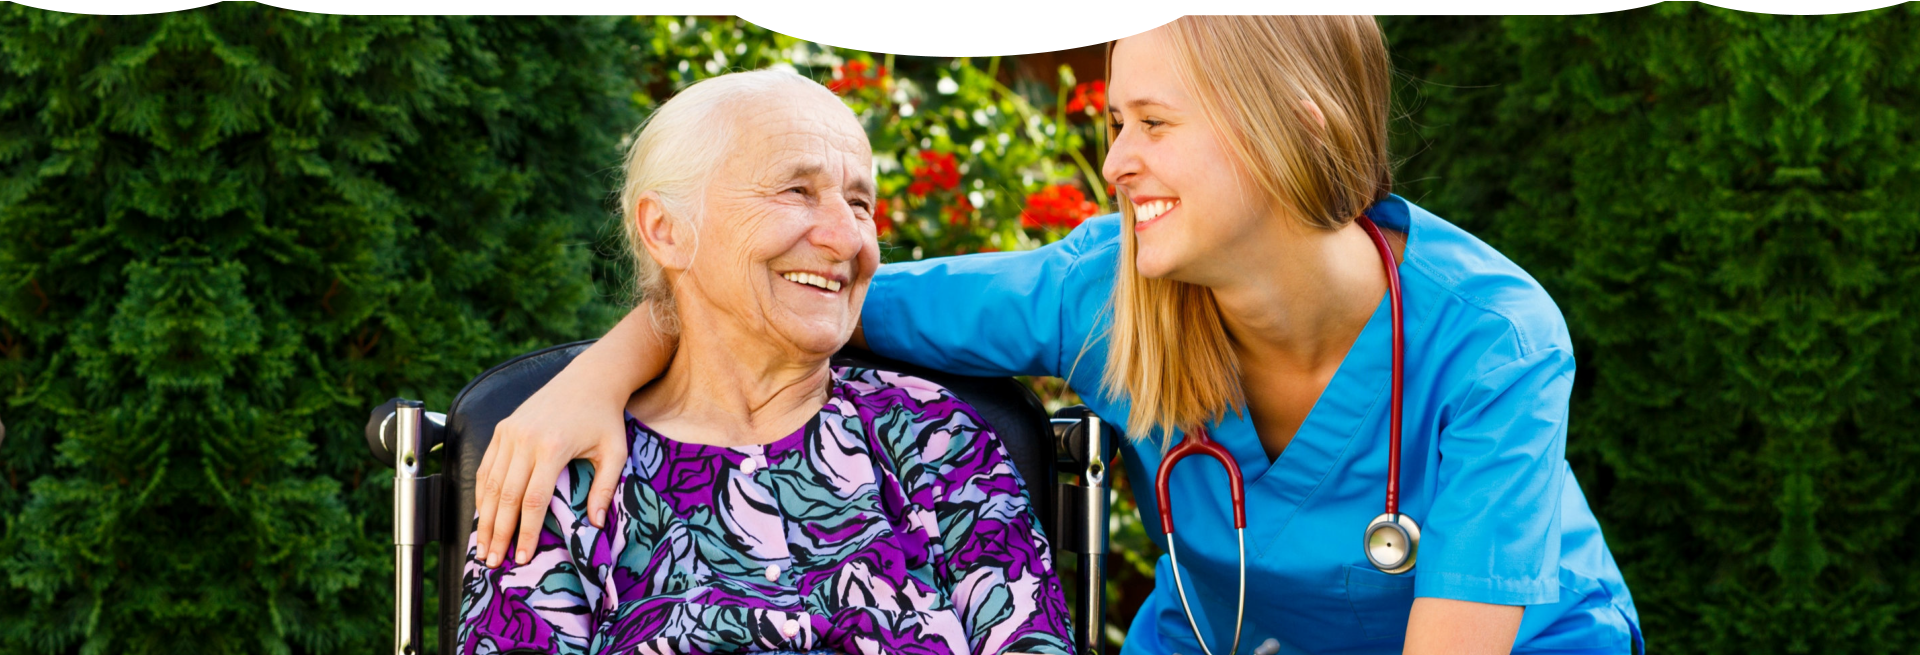 caregiver and patient smiling and looking at each other